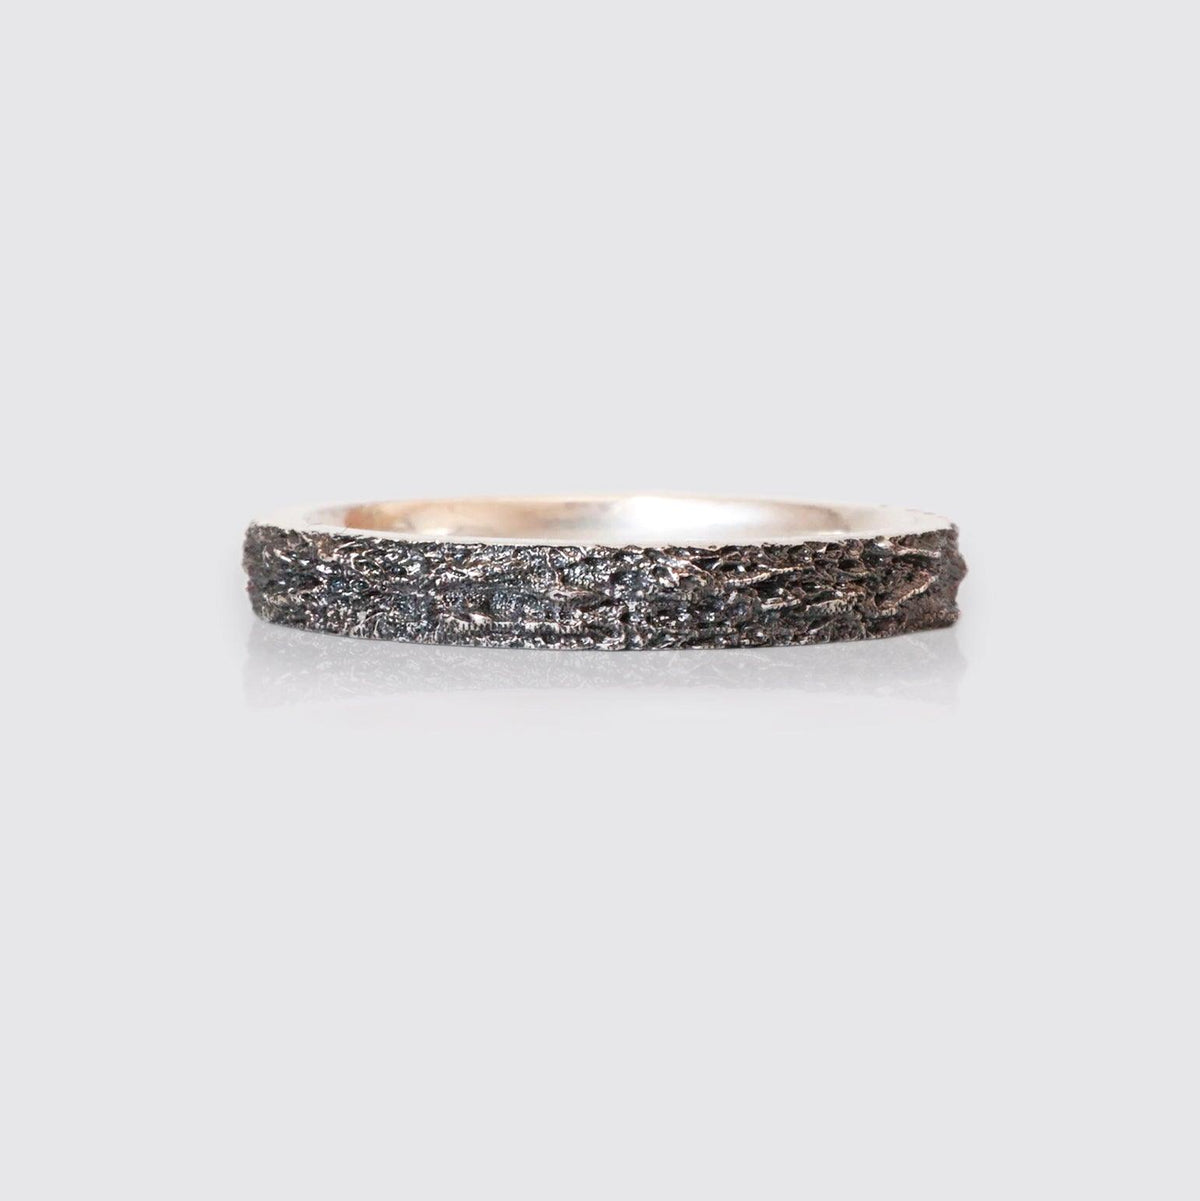 Oxidized Meteoroid Ring Band in Sterling Silver, 3mm - Tippy Taste Jewelry